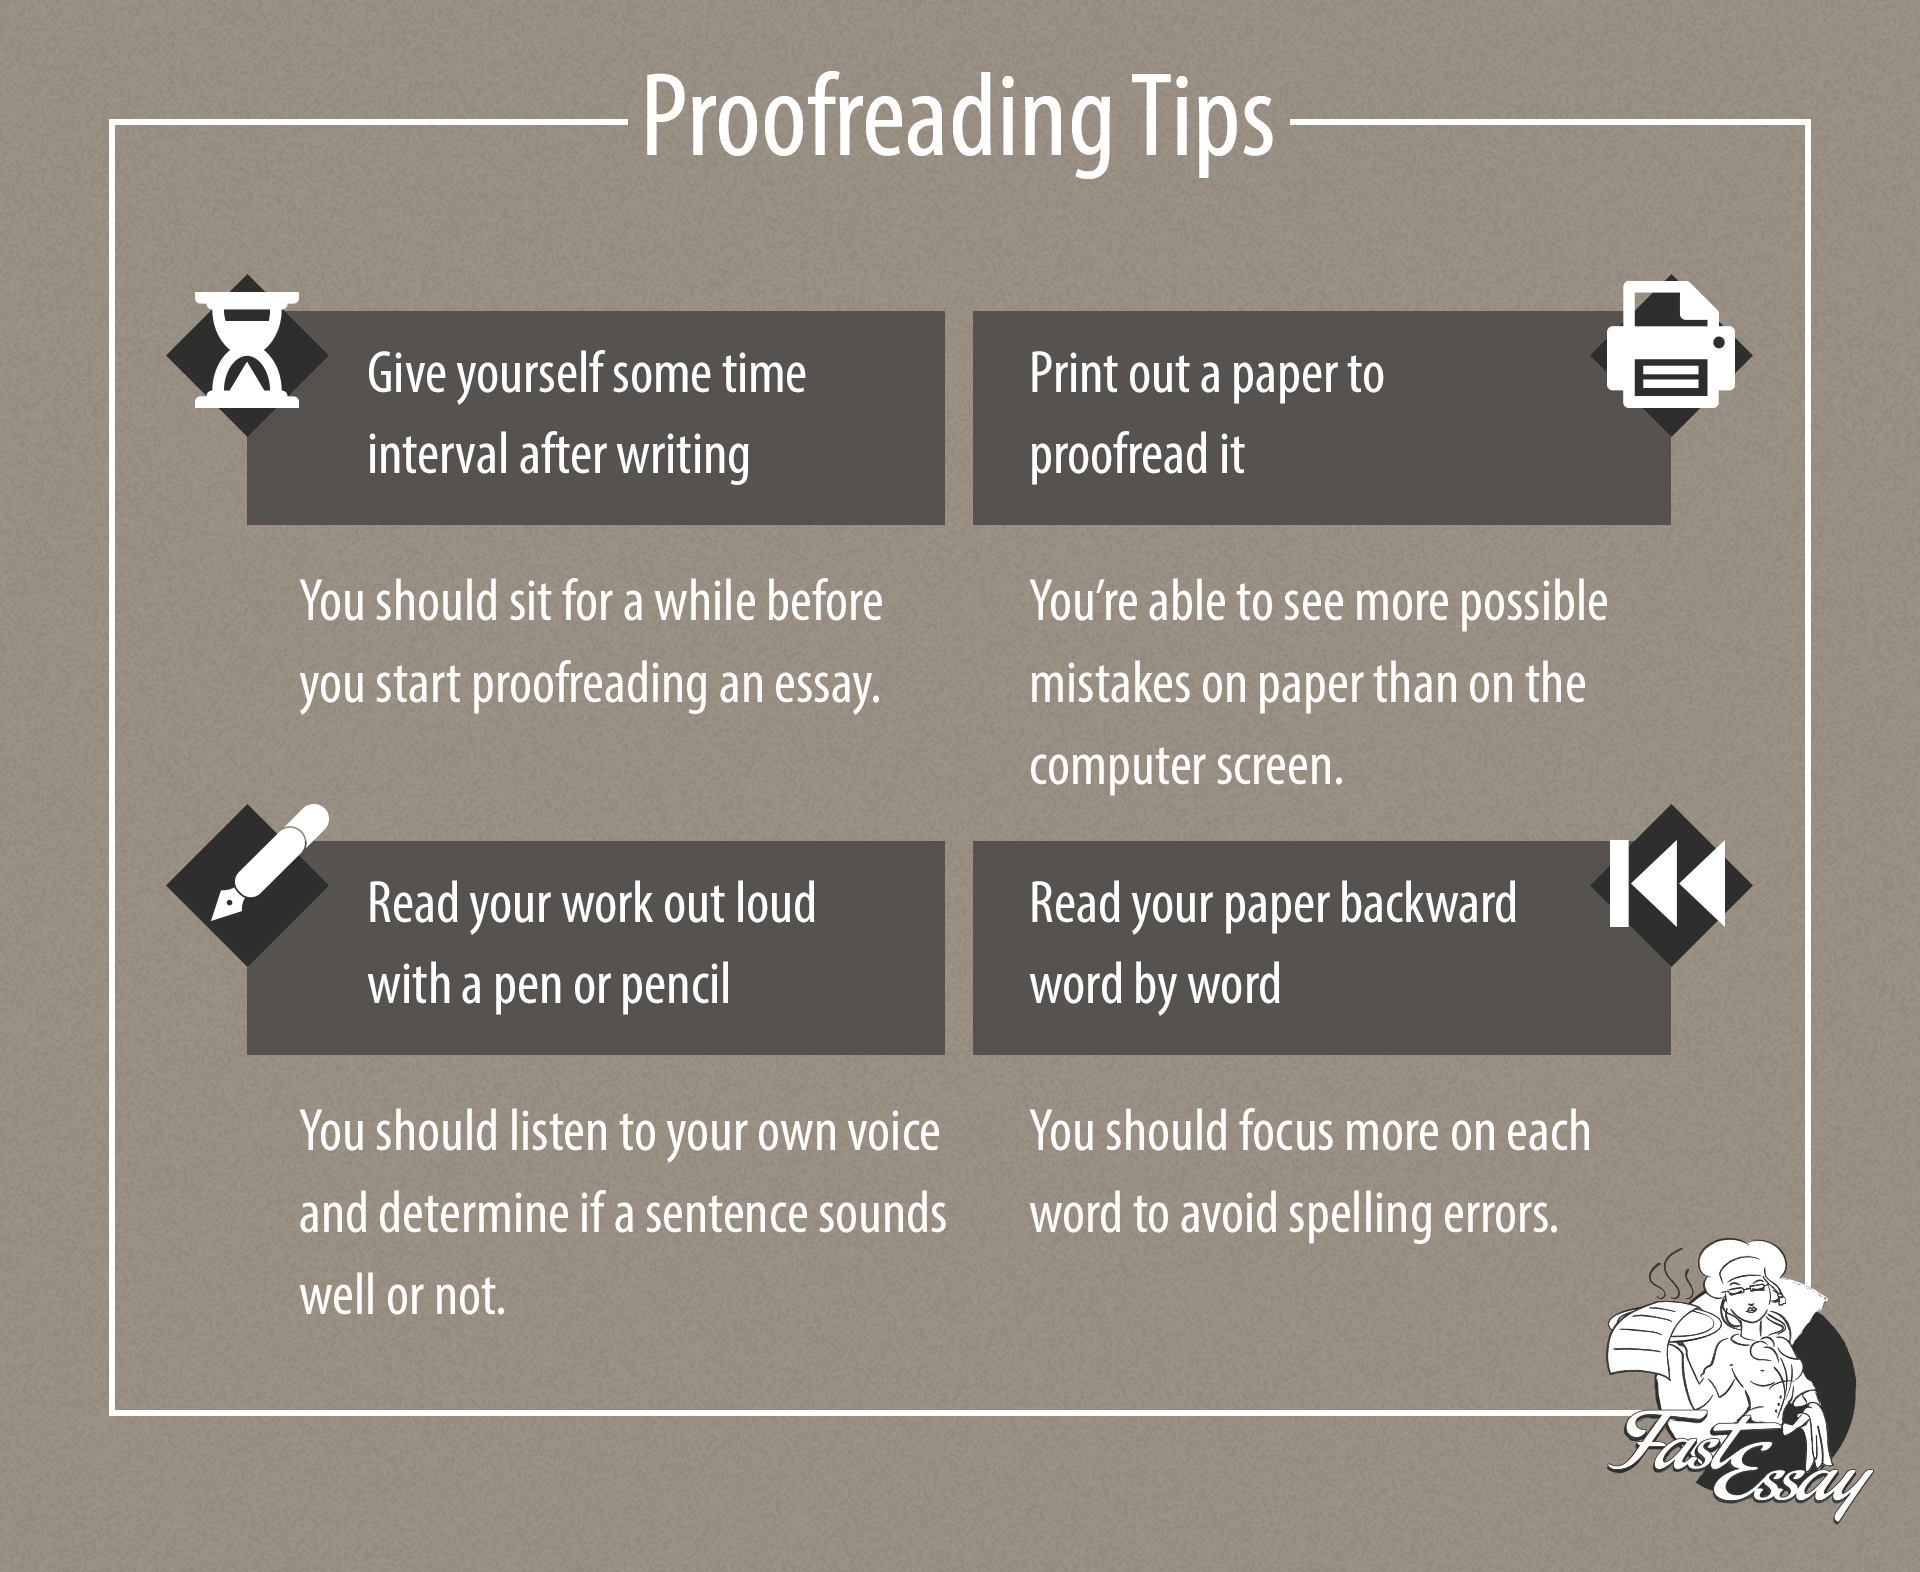 Proofreading essay tips